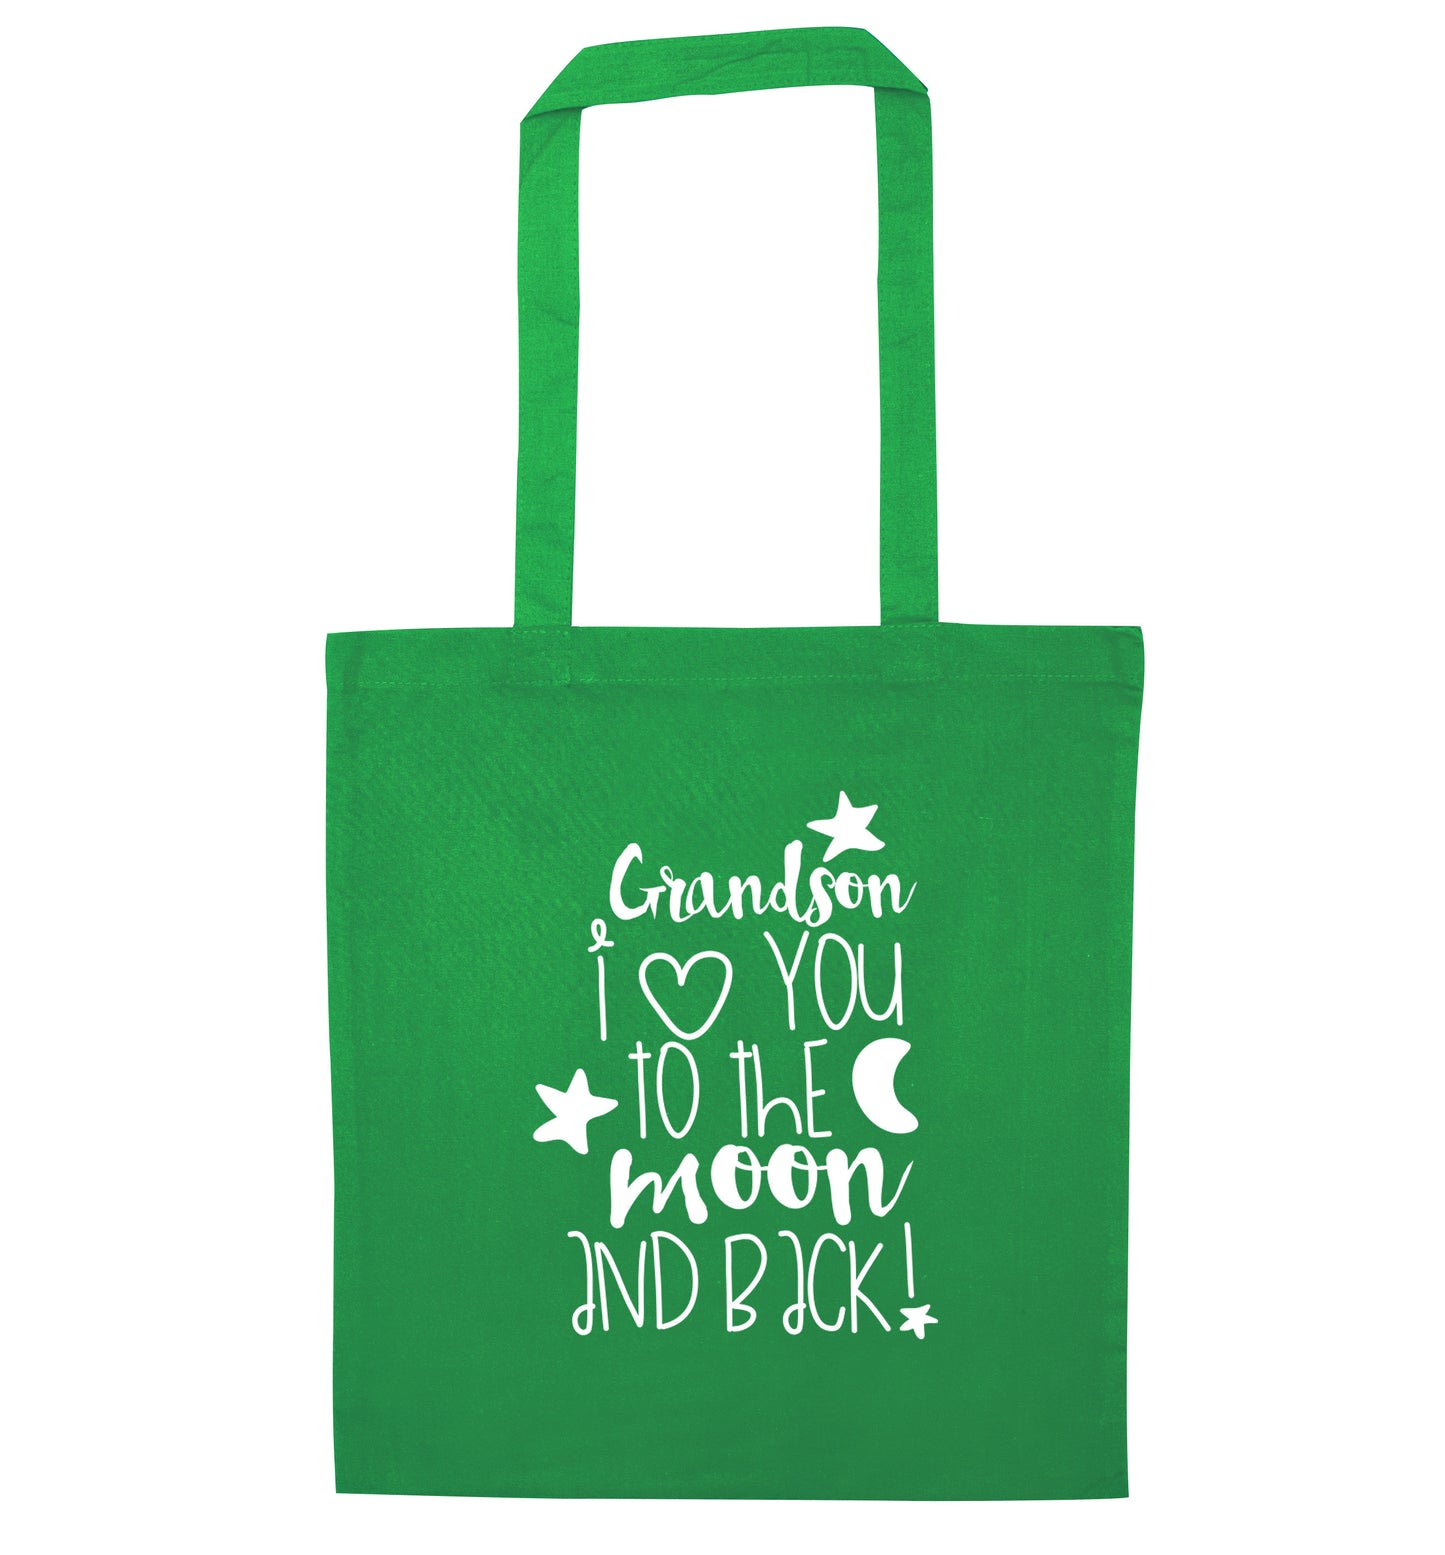 Grandson I love you to the moon and back green tote bag